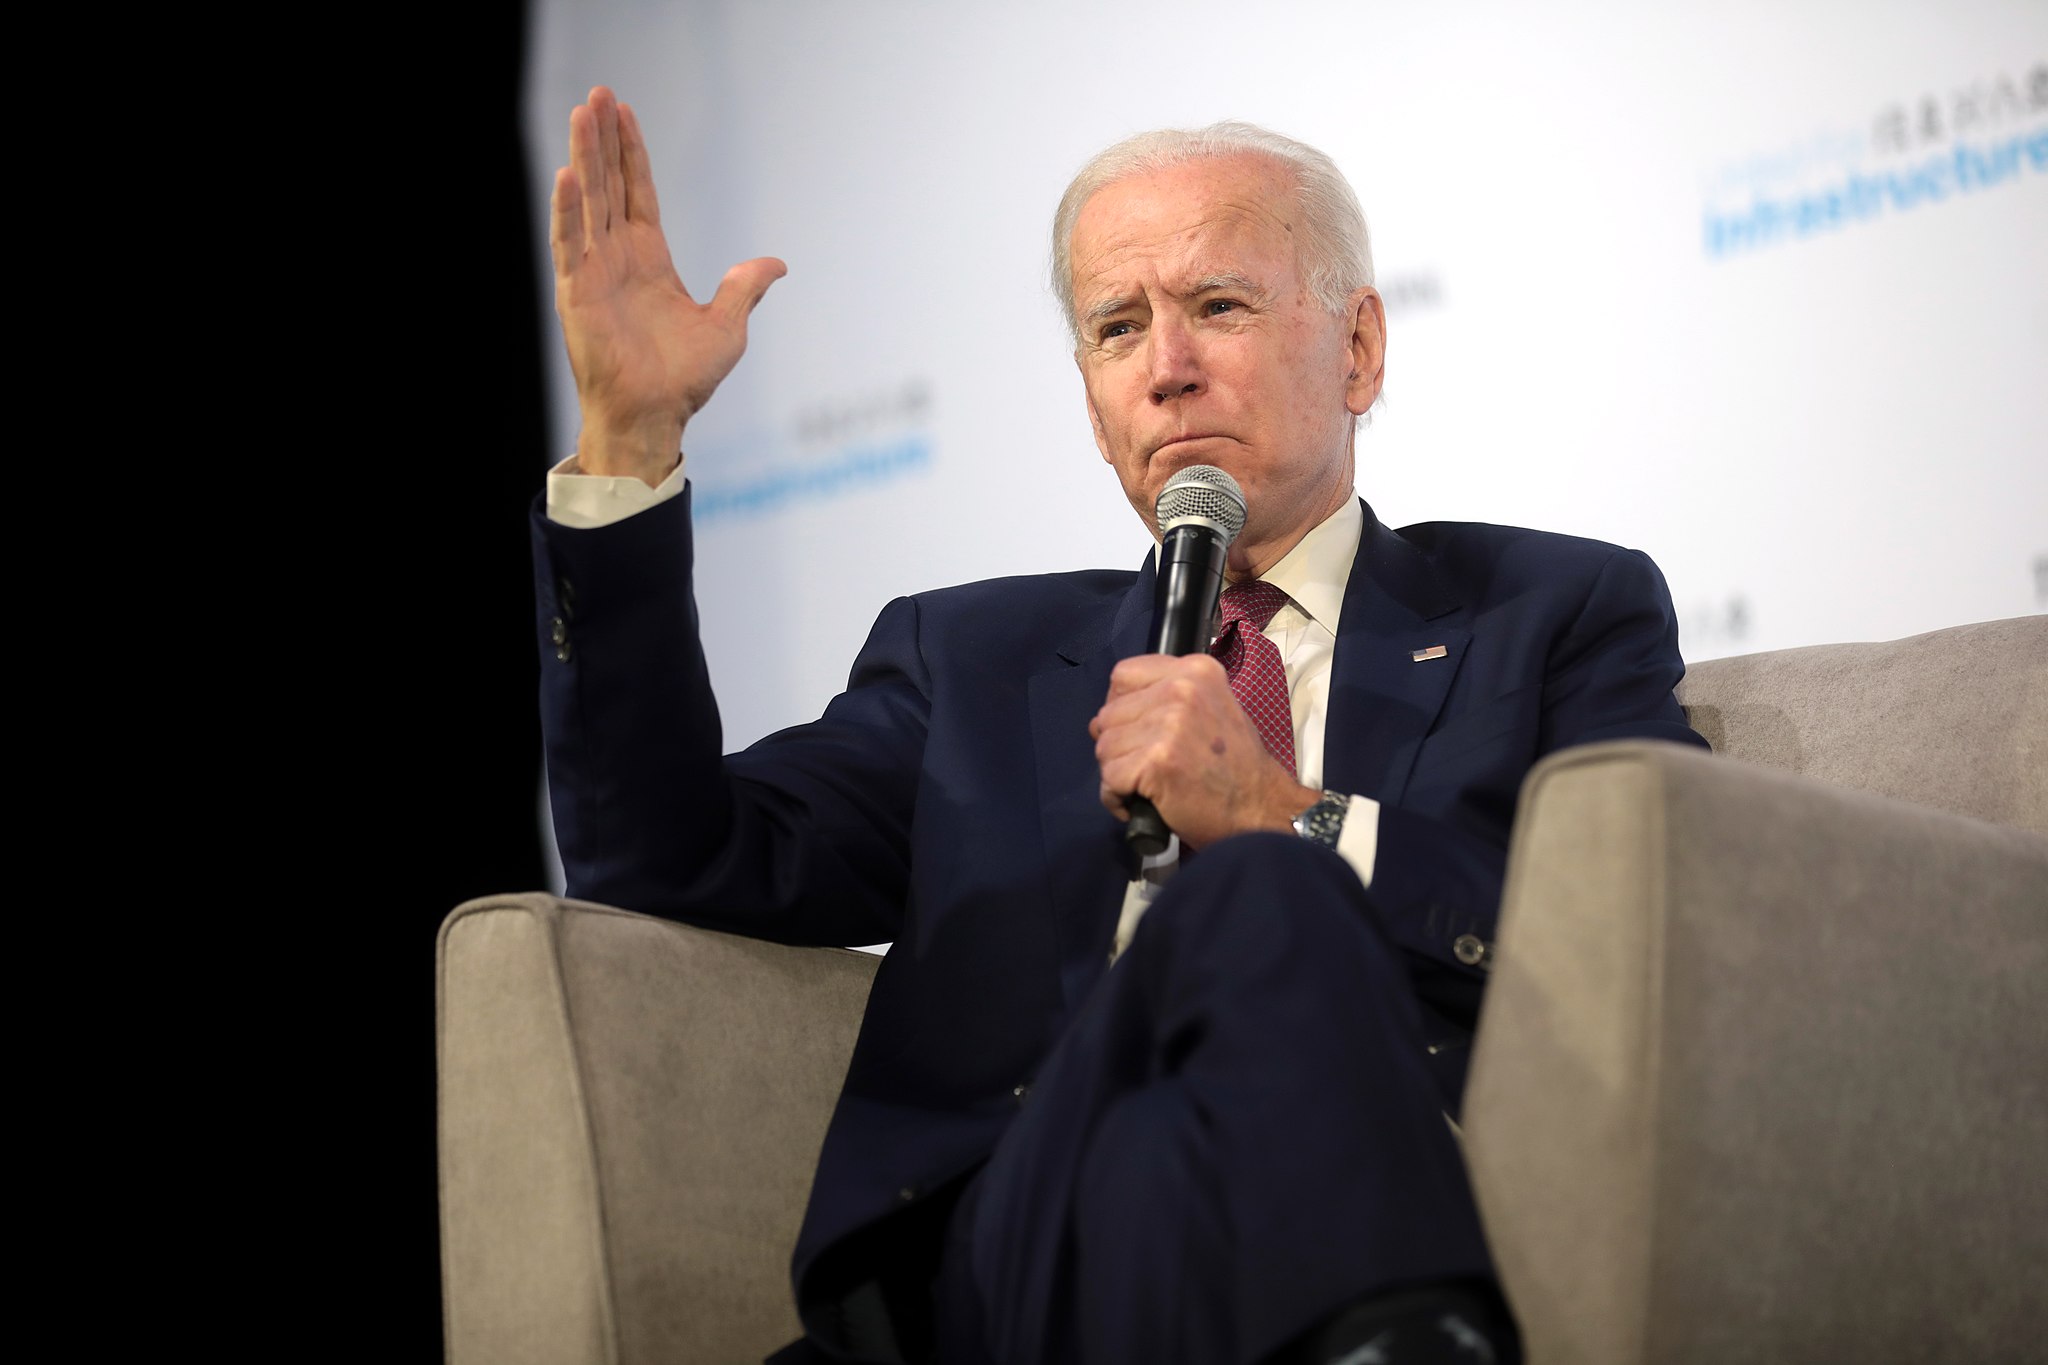 Biden Says He Loves America More Than Trump, Is This True?